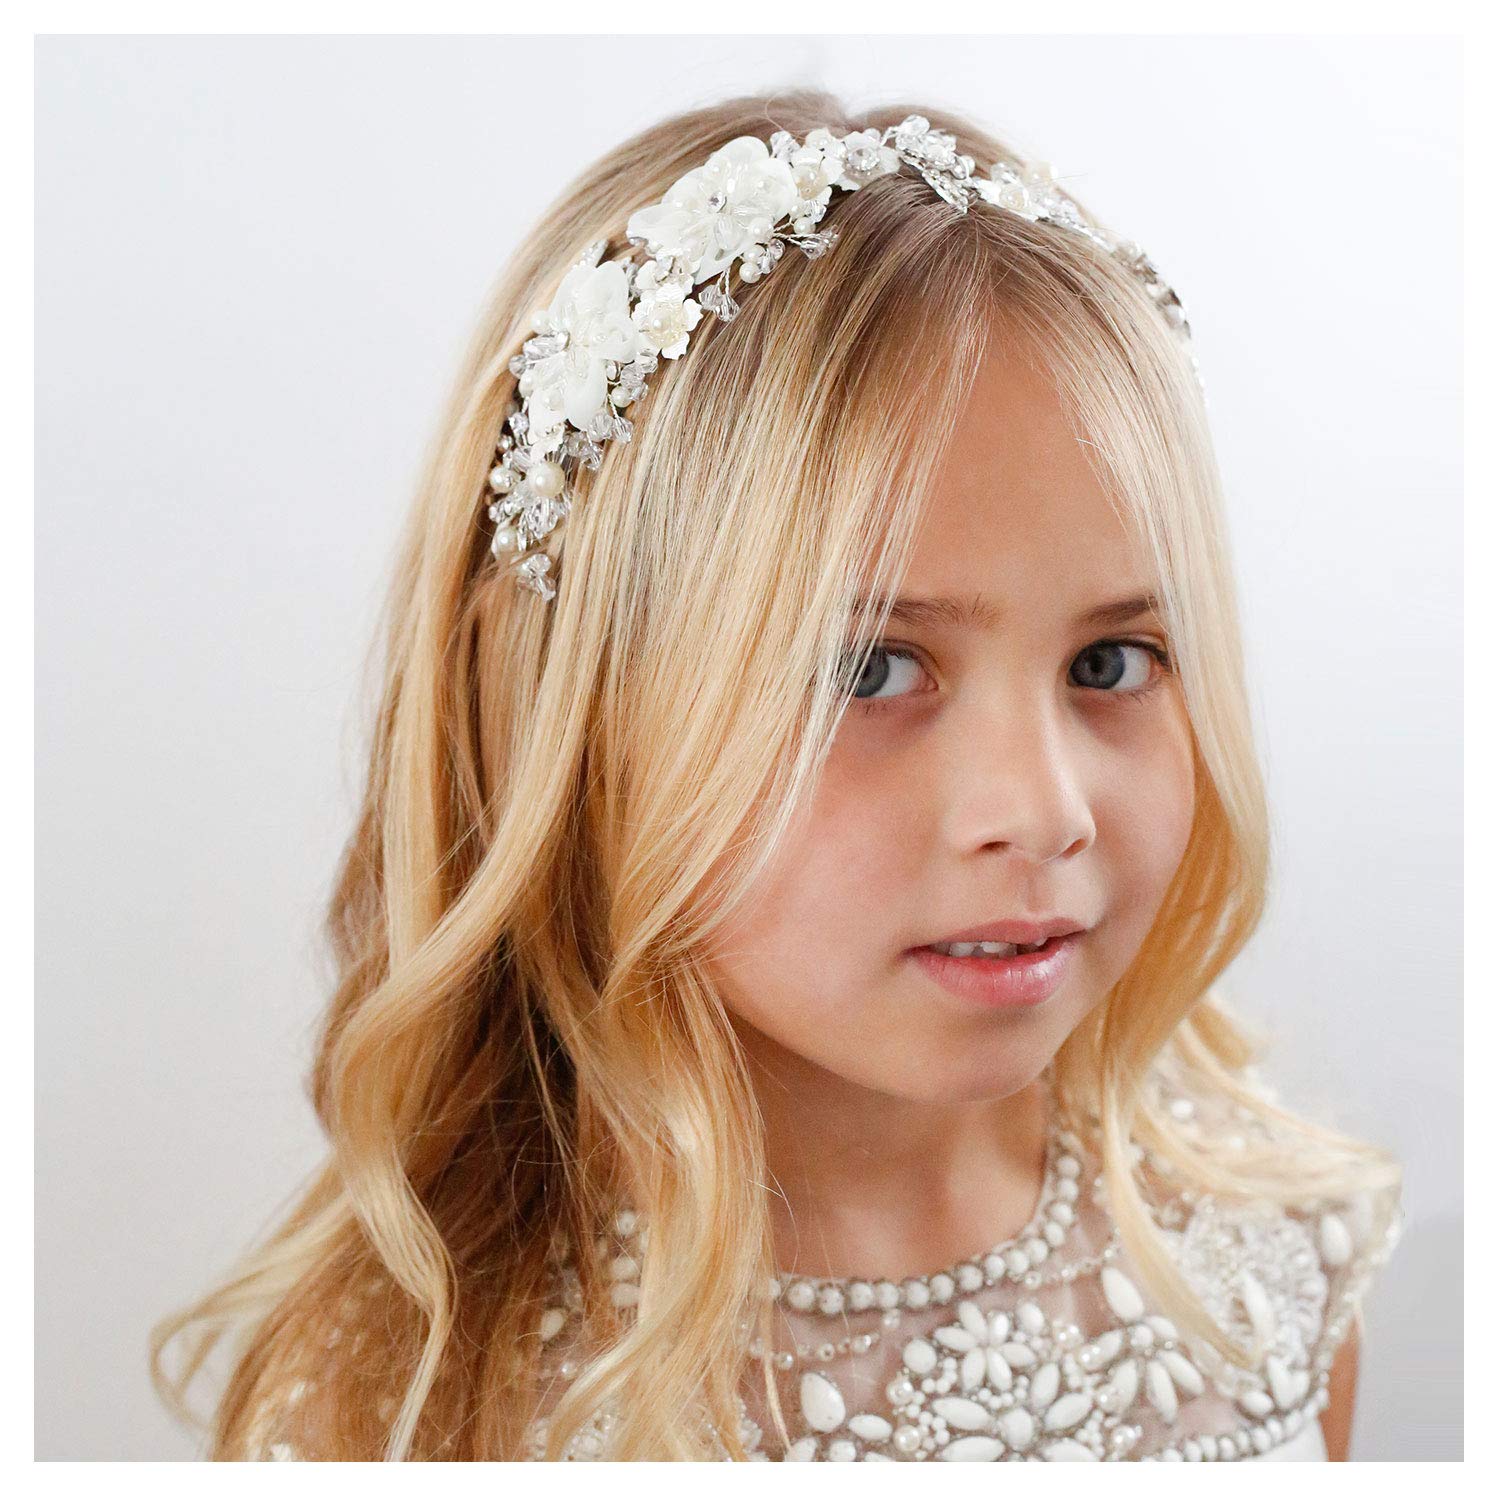 SWEETV Flower Girl Headpiece Ivory Tulle Flowers Wedding Headband for Girls  Princess Pearl Hair Accessories for Birthday Party First Communion